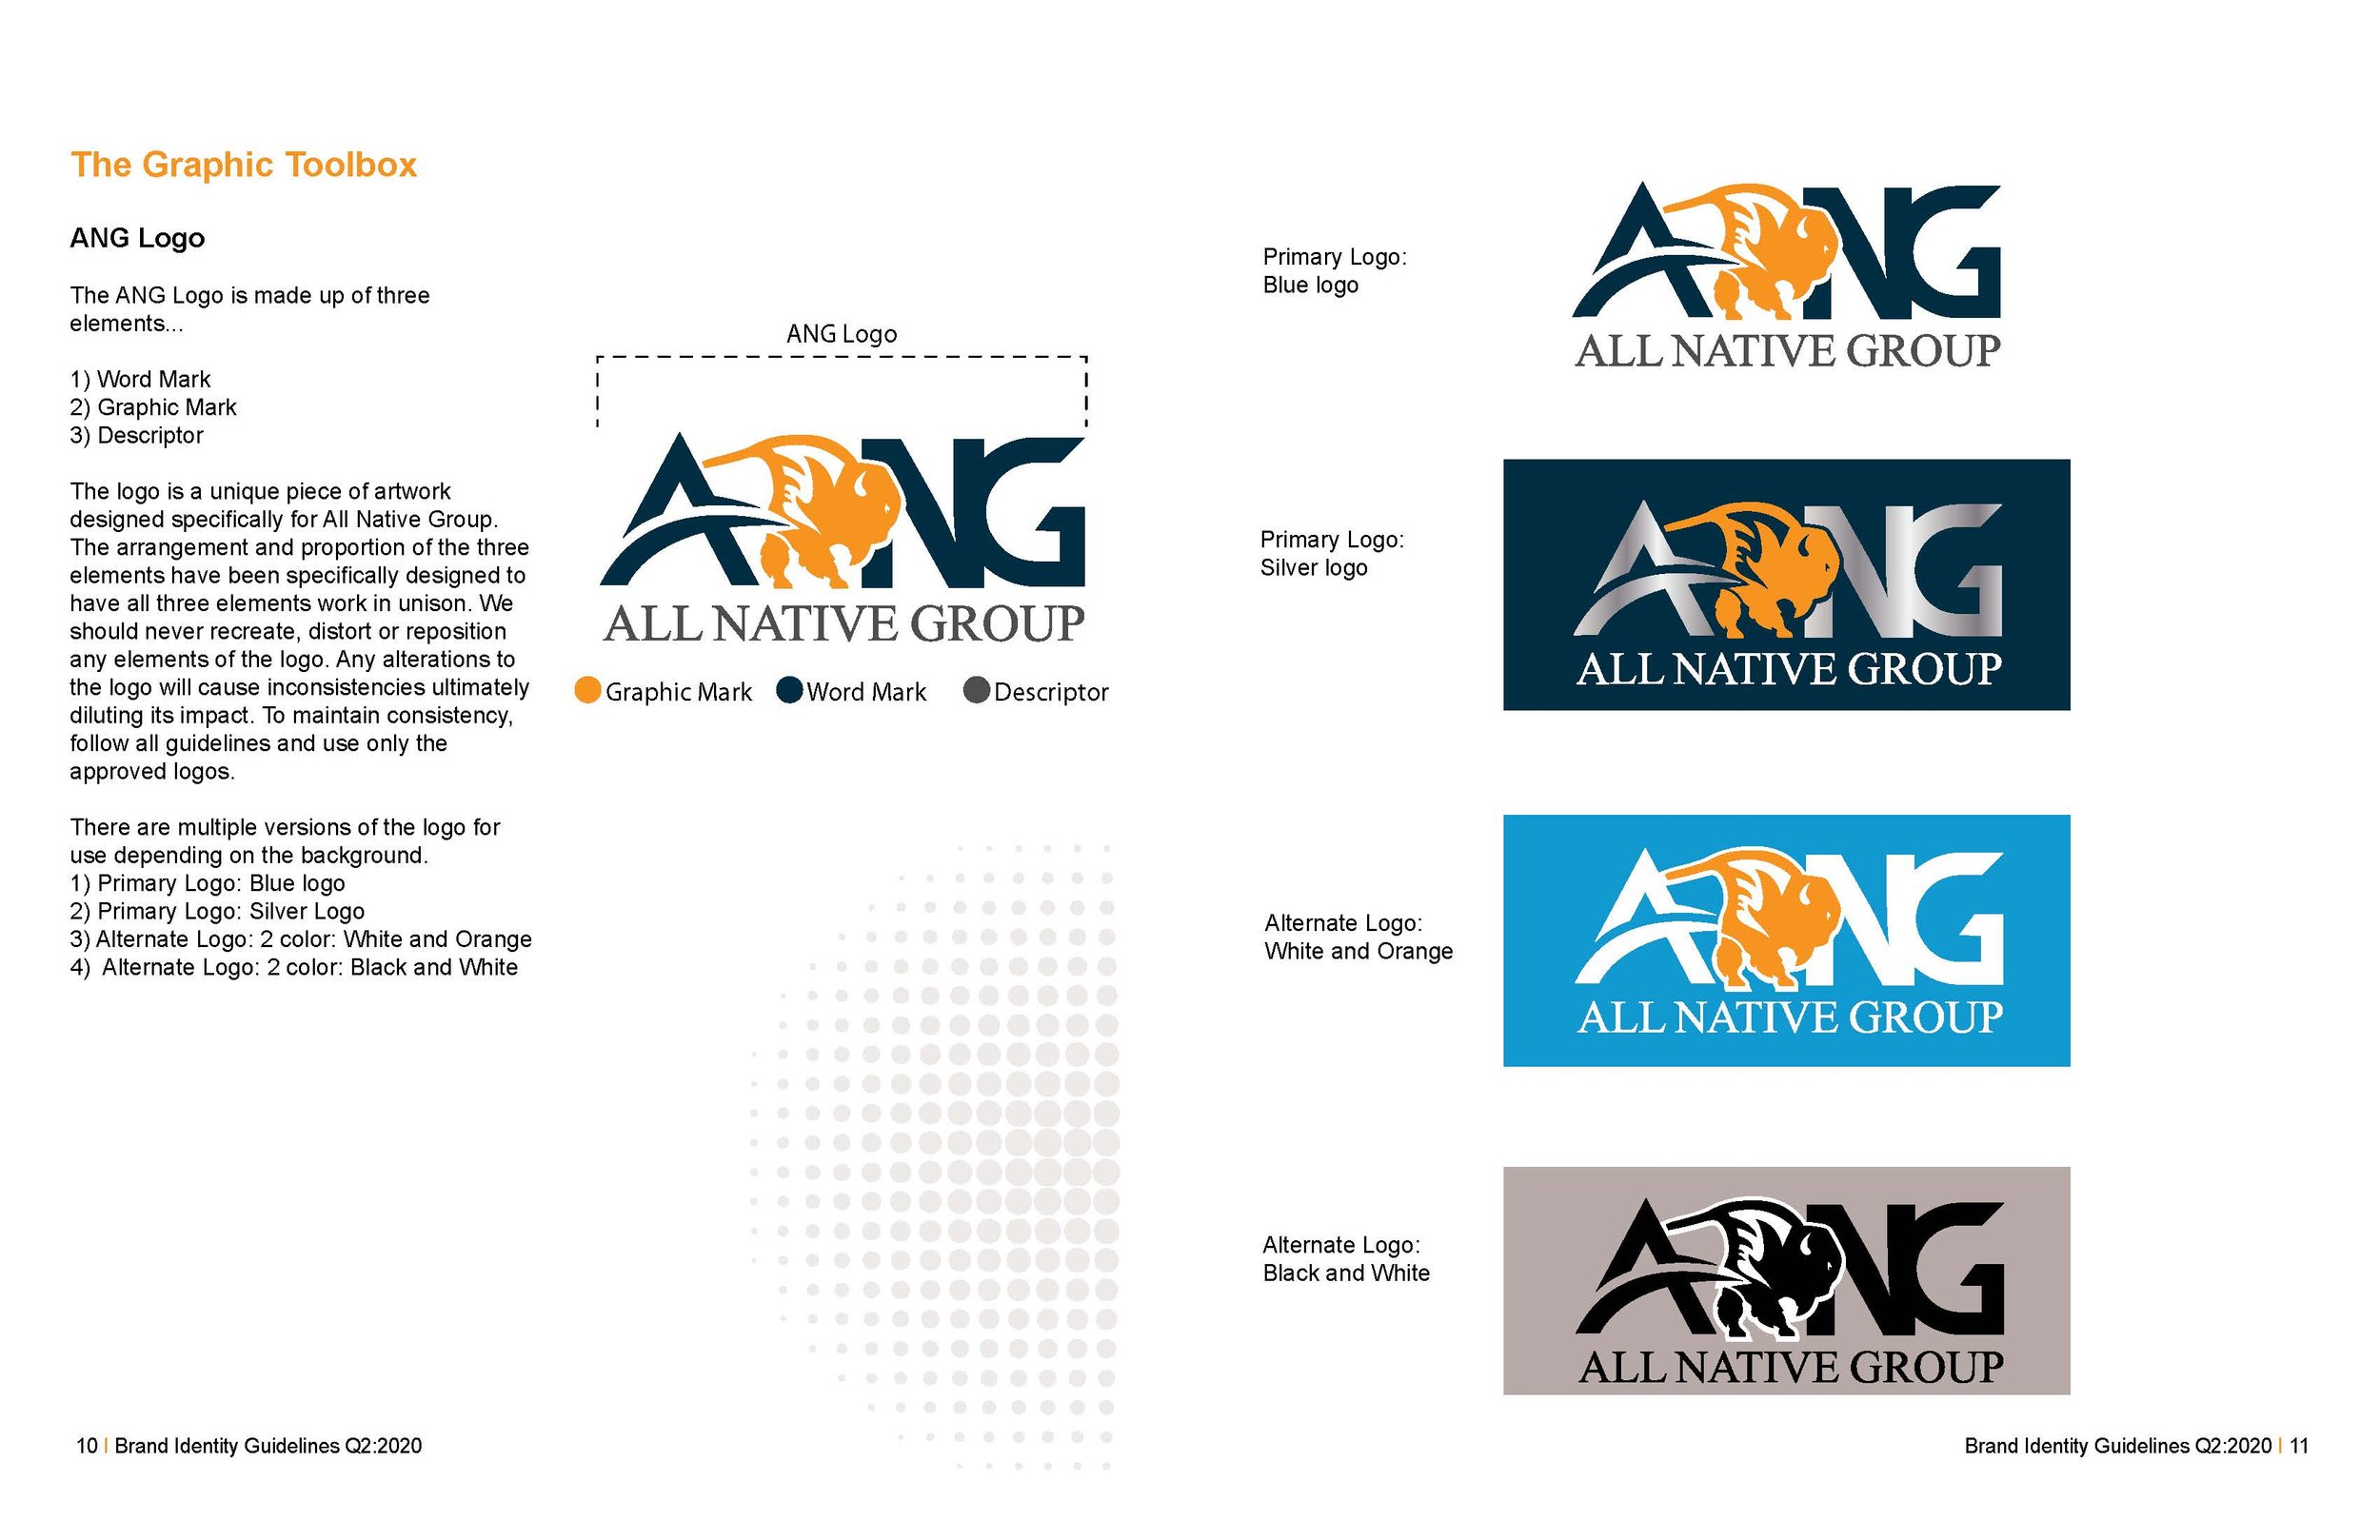 ANG Brand Identity Branding Guidelines_2pg spreads_Page_06.jpg